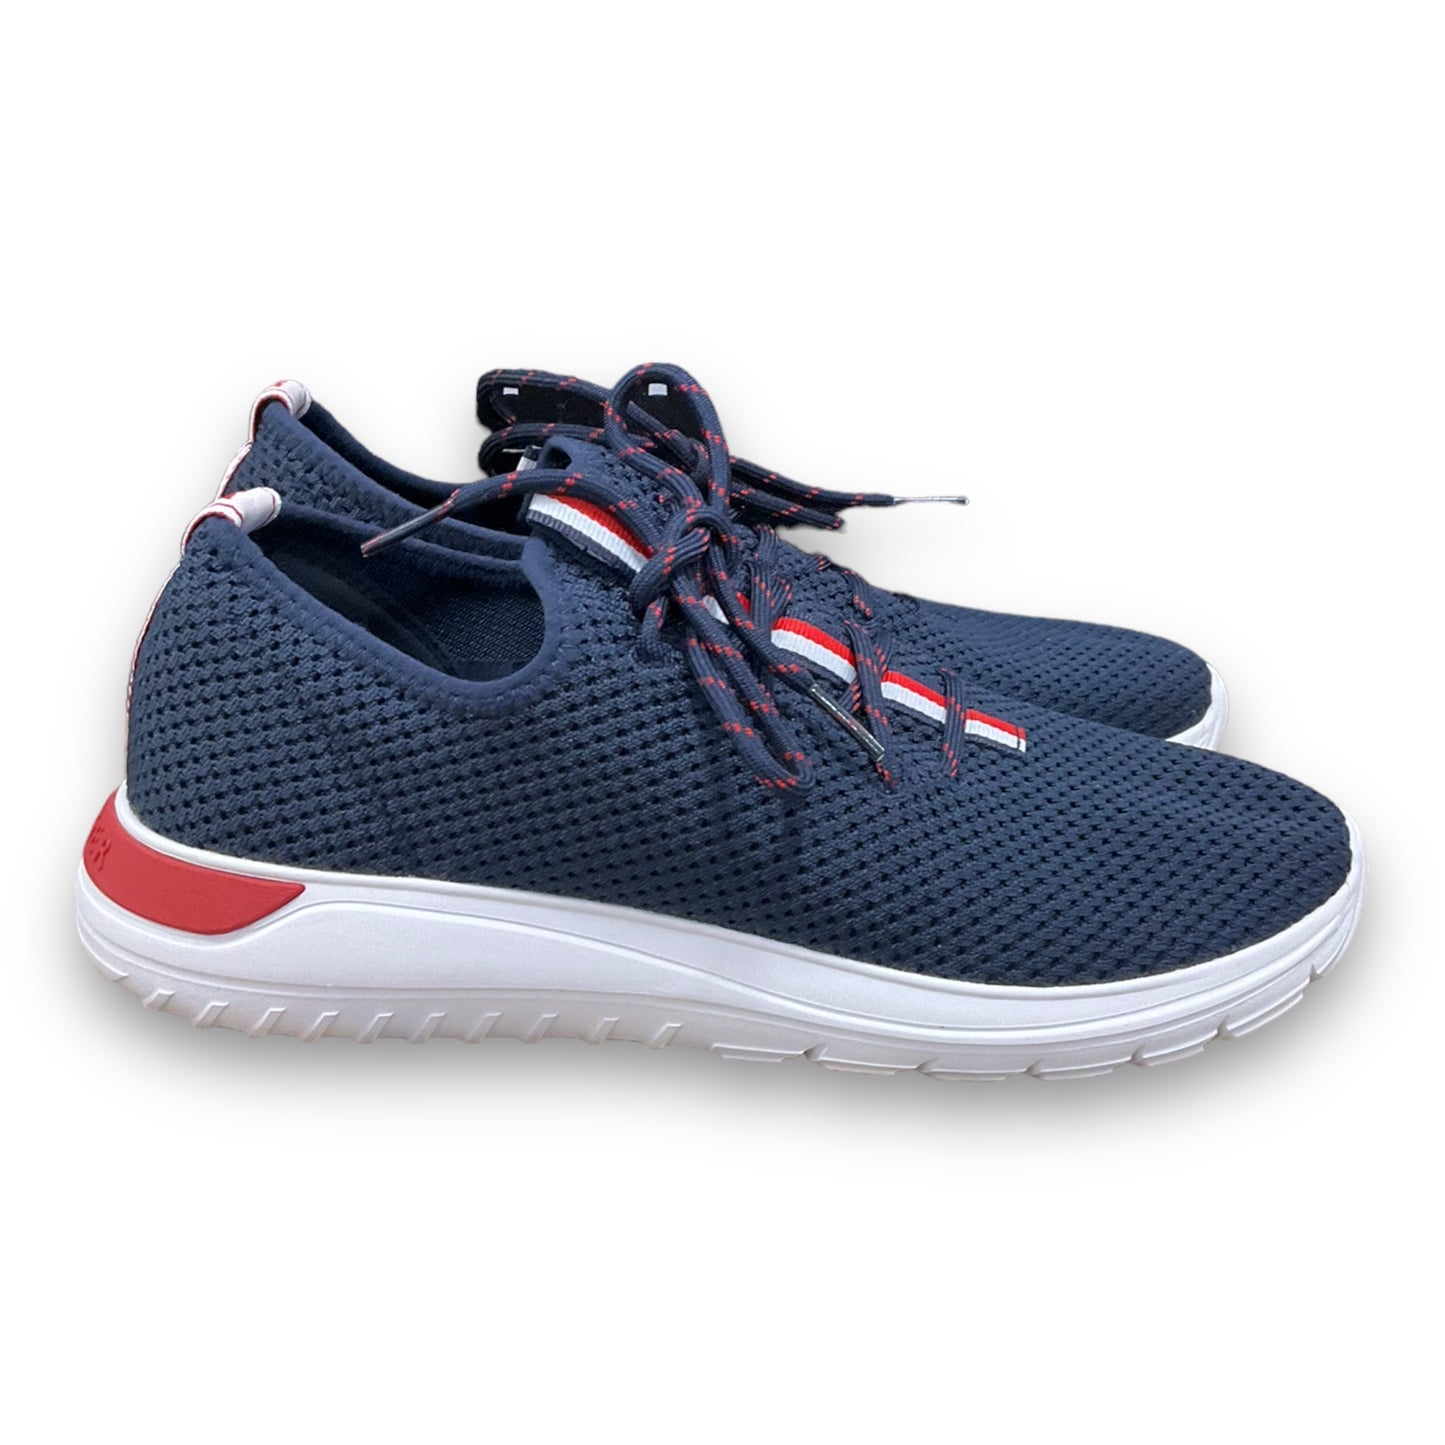 Shoes Athletic By Tommy Hilfiger  Size: 10